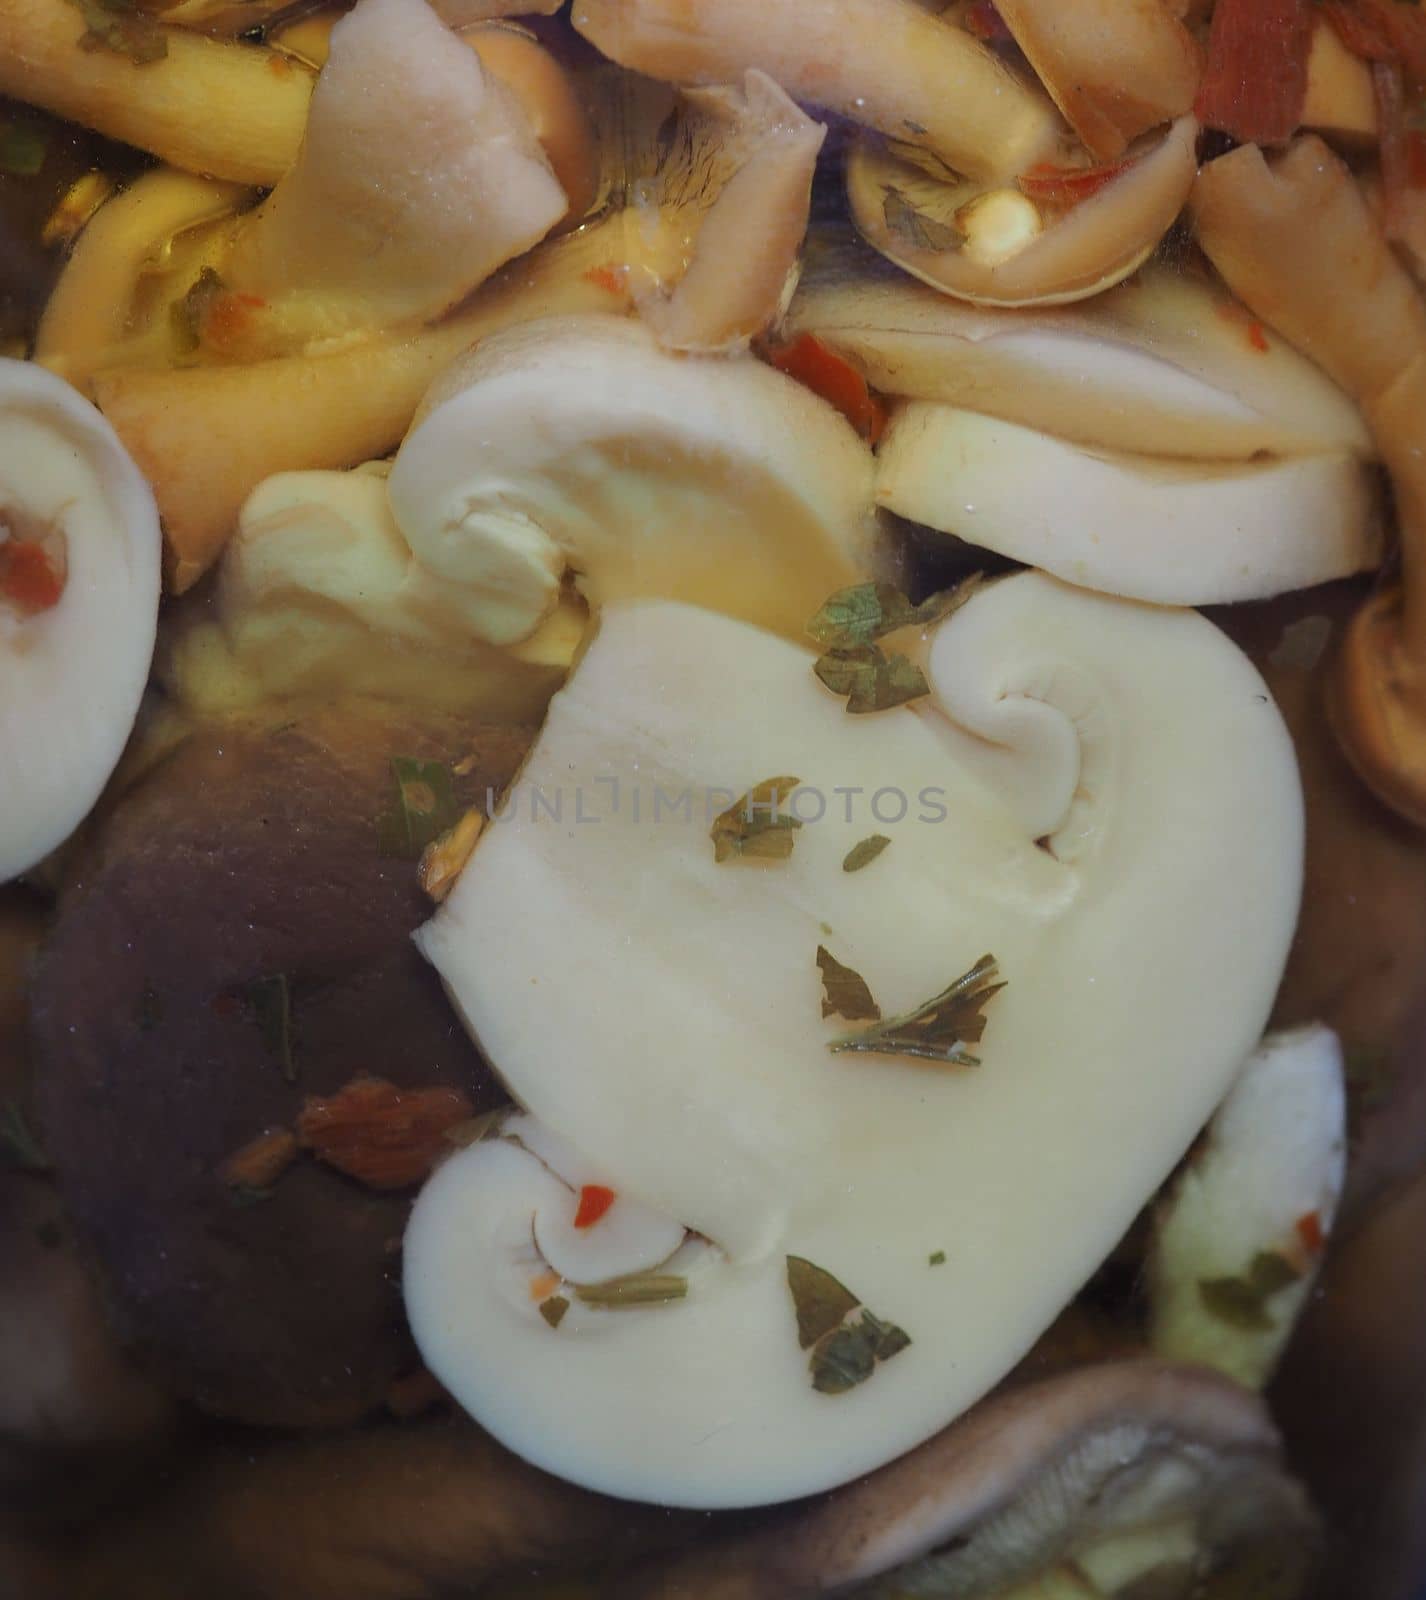 mixed champignons and porcini mushrooms in a glass jar